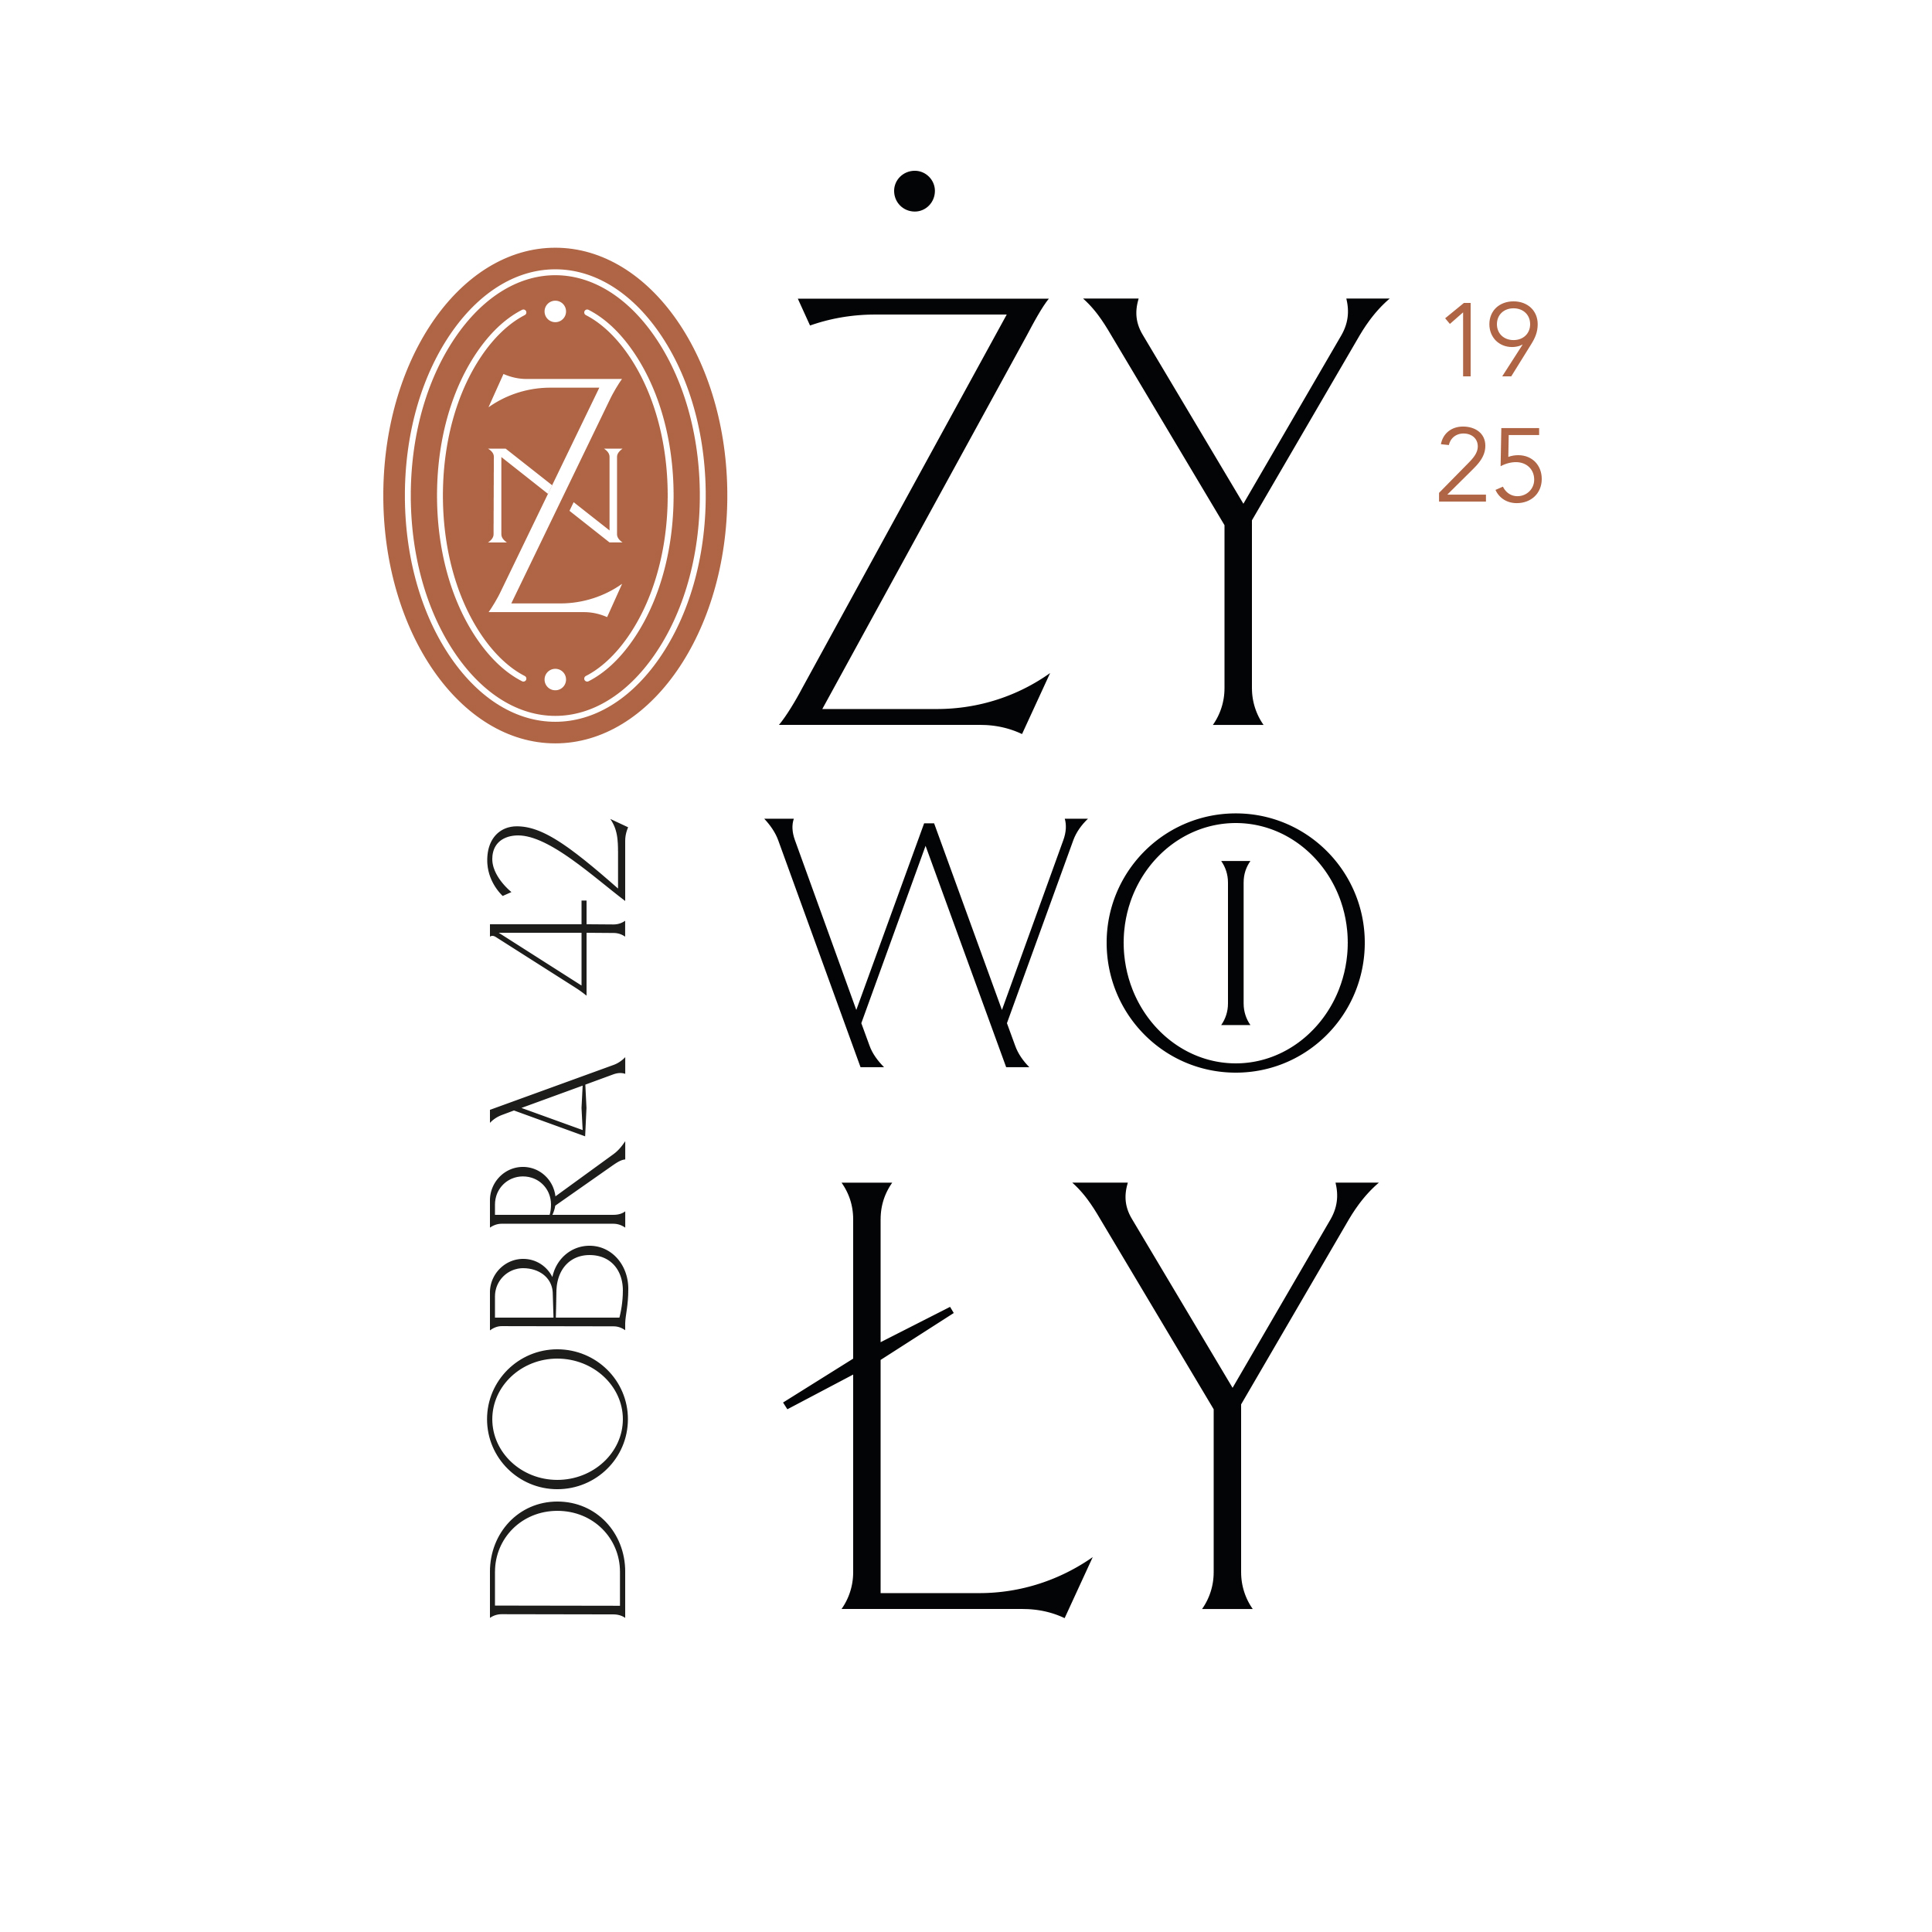 Piekarnia Zywioly logo design by logo designer Sparrow Design for your inspiration and for the worlds largest logo competition